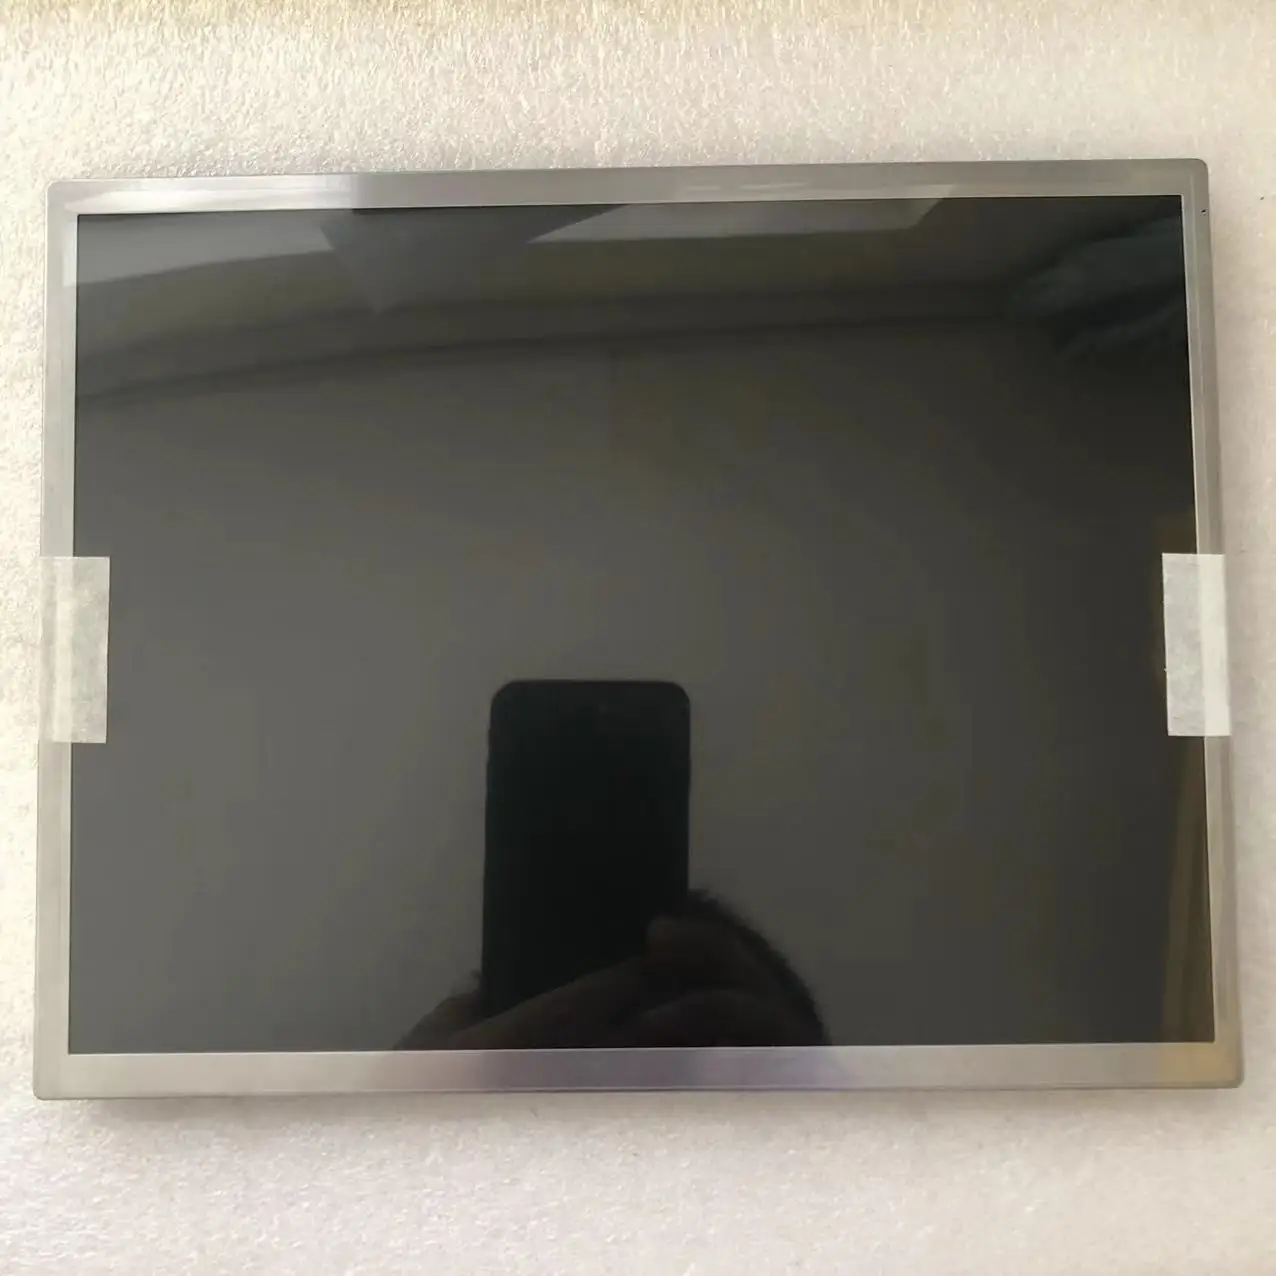 For 8.4-inch NL6448AC33-A1D LCD Screen Display Panel Fully Tested Before Shipment for 7 2 inch kcs6448mstt x1 lcd screen display panel fully tested before shipment